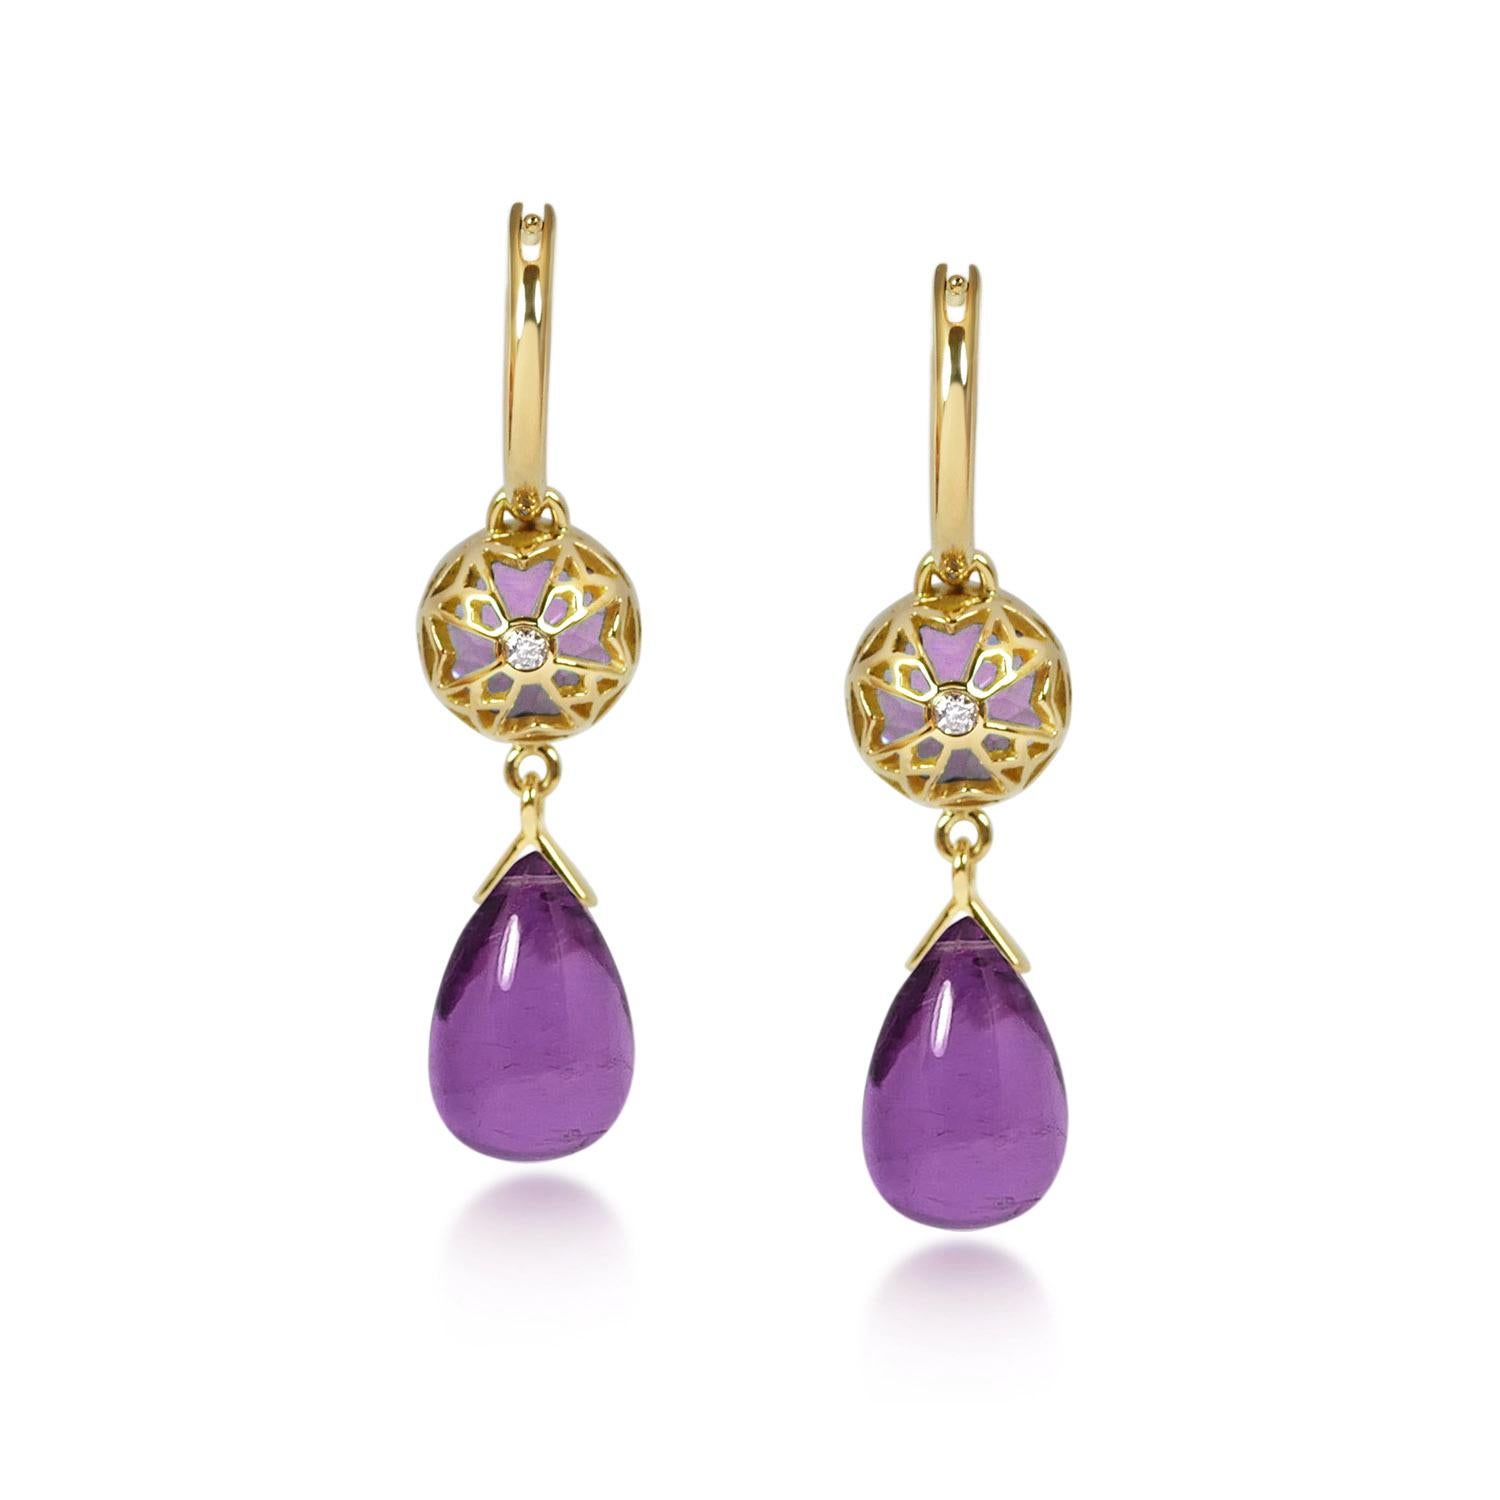 Handcrafted 2.40 & 6.20 Carats Amethysts 18 Karat Yellow Gold Drop Earrings. Dancing drops carved in Amethyst under a set of 8mm round cut Amethyst stones encased in our iconic hand pierced gold lace to let the light through. A diamond has been set